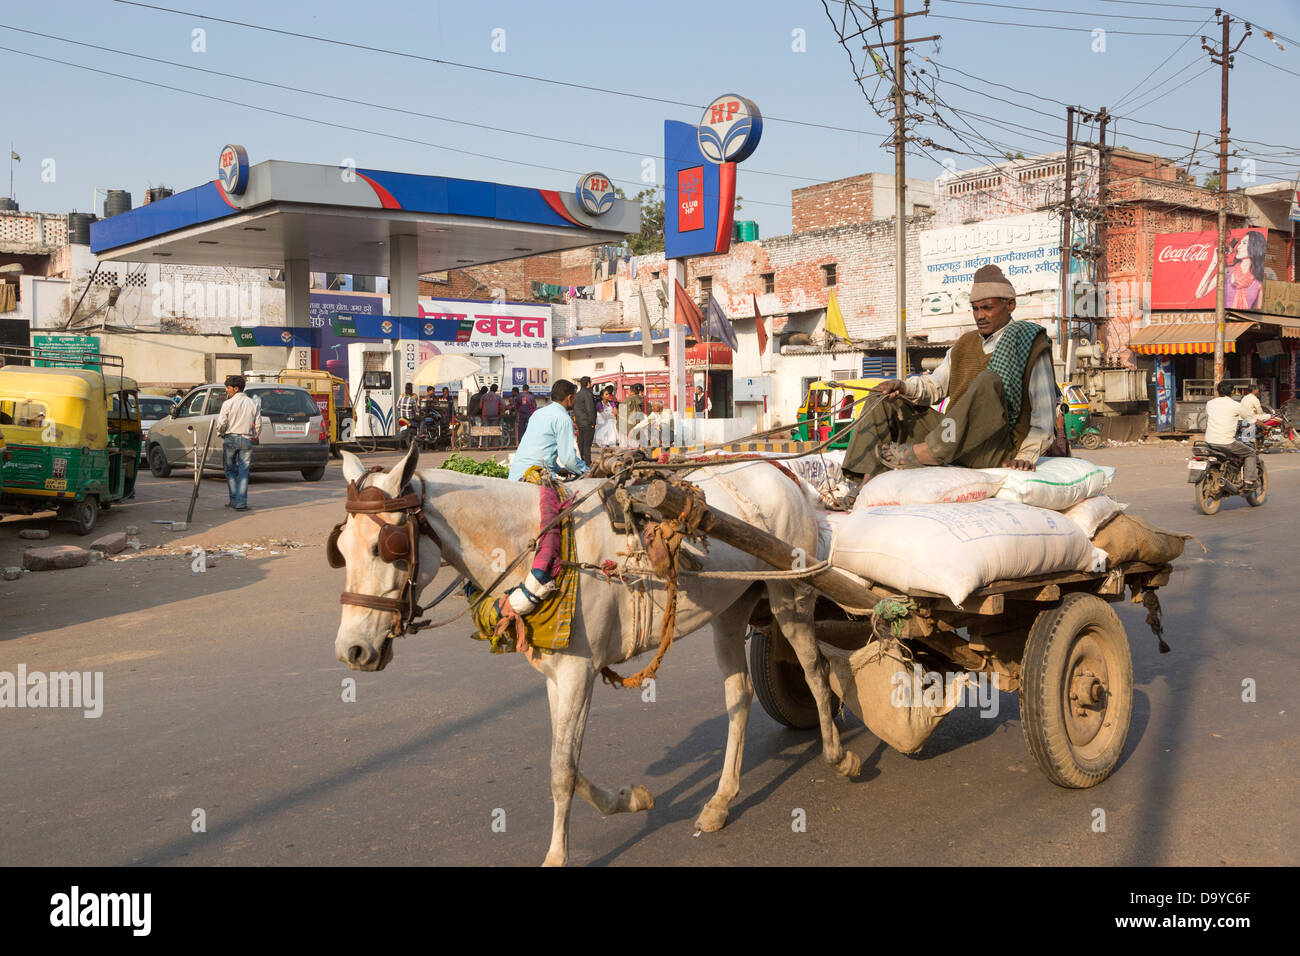 India, Uttar Pradesh, Agra, horse and cart passing in front of fuel garage Stock Photo